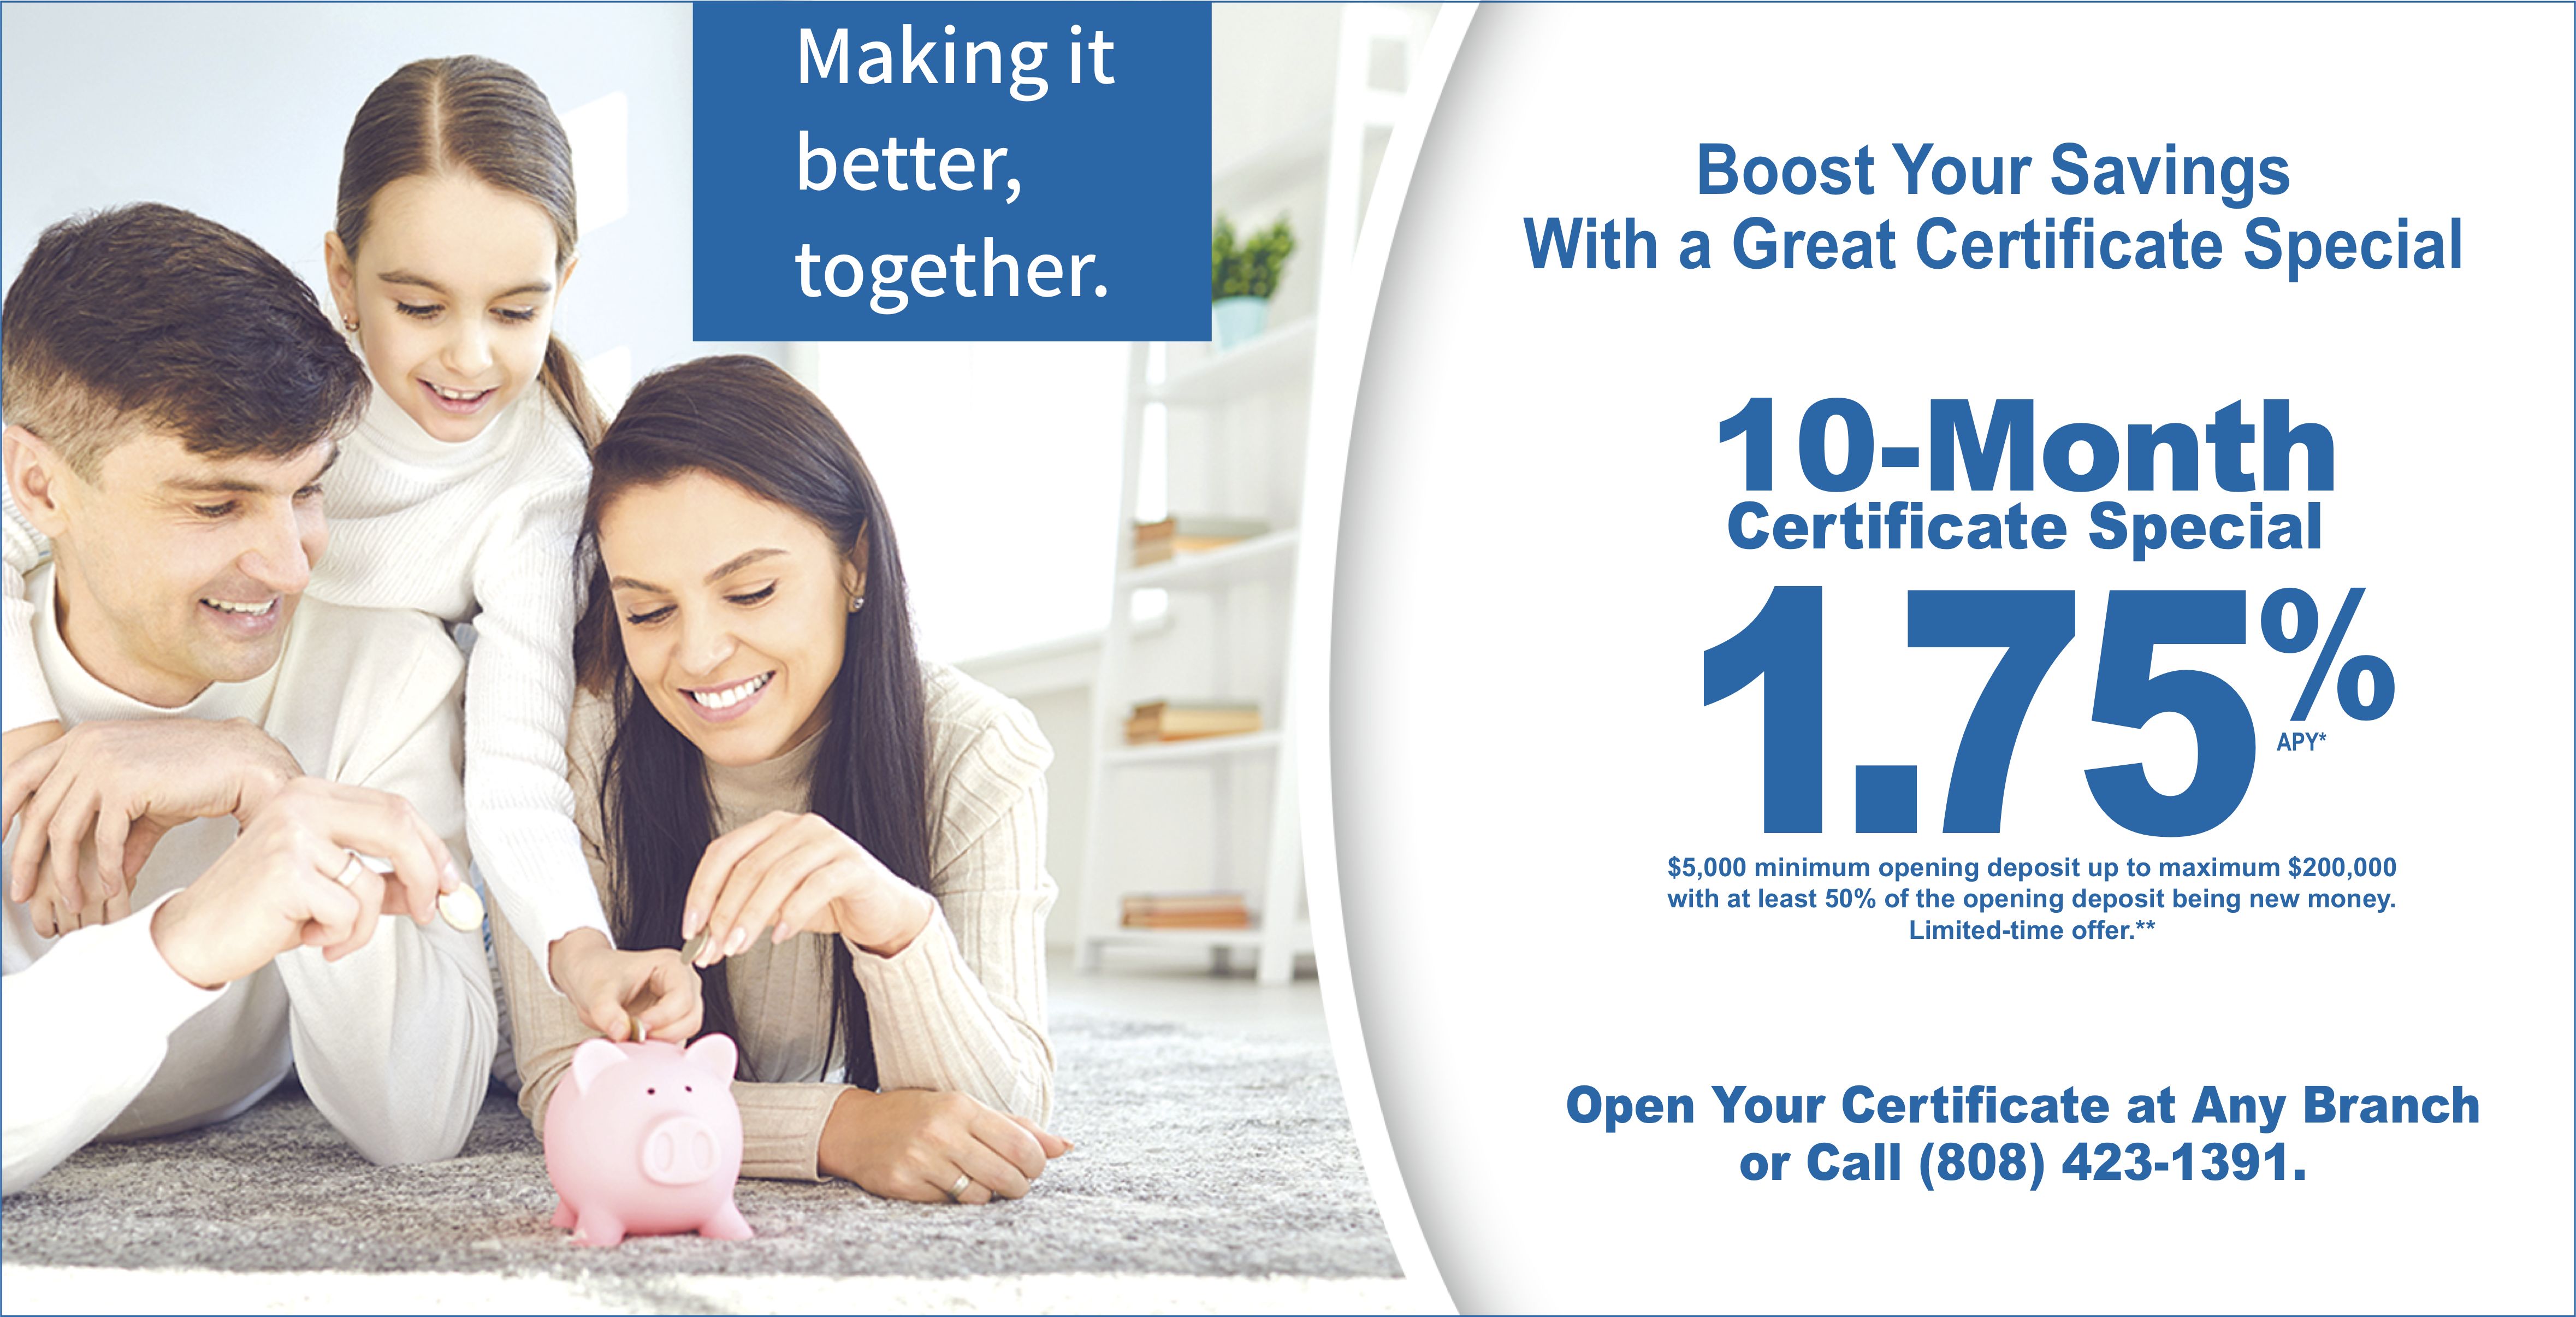 Making it better together. 10-Month Certificate Special 1.75% APY. $5,000  minimum opening balance with up to maximum $200,000 with at least 50% of the opening balance being new money. Limited-time offer.